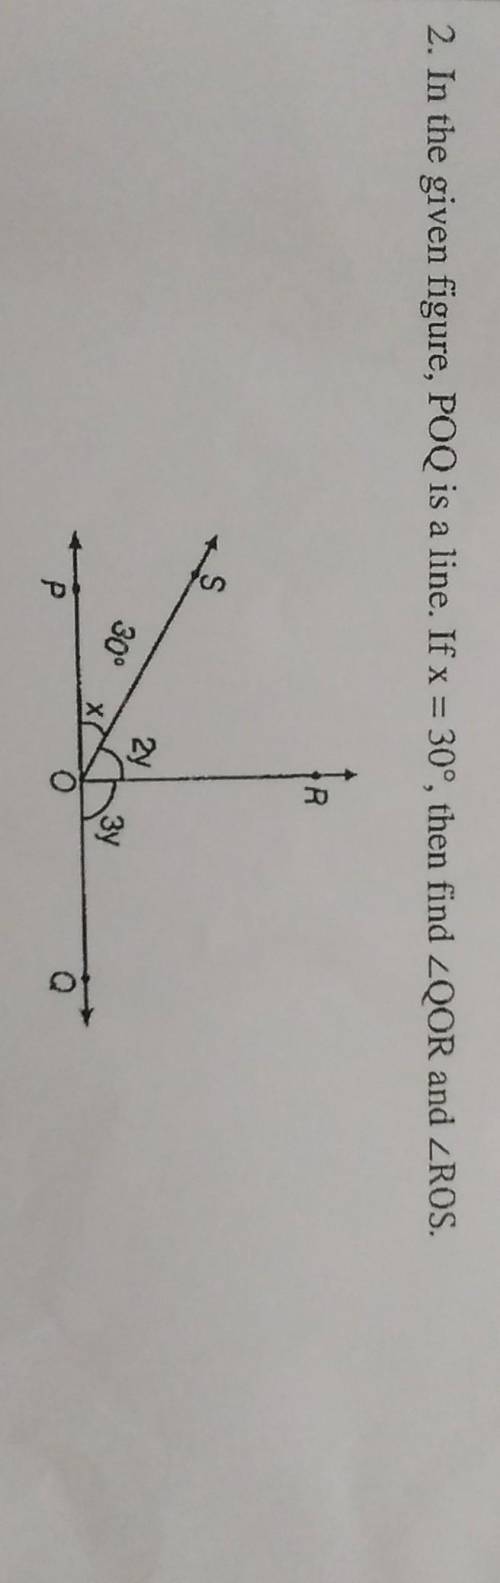 In the given figure poq is a line. if x=30 then find qor and ros​